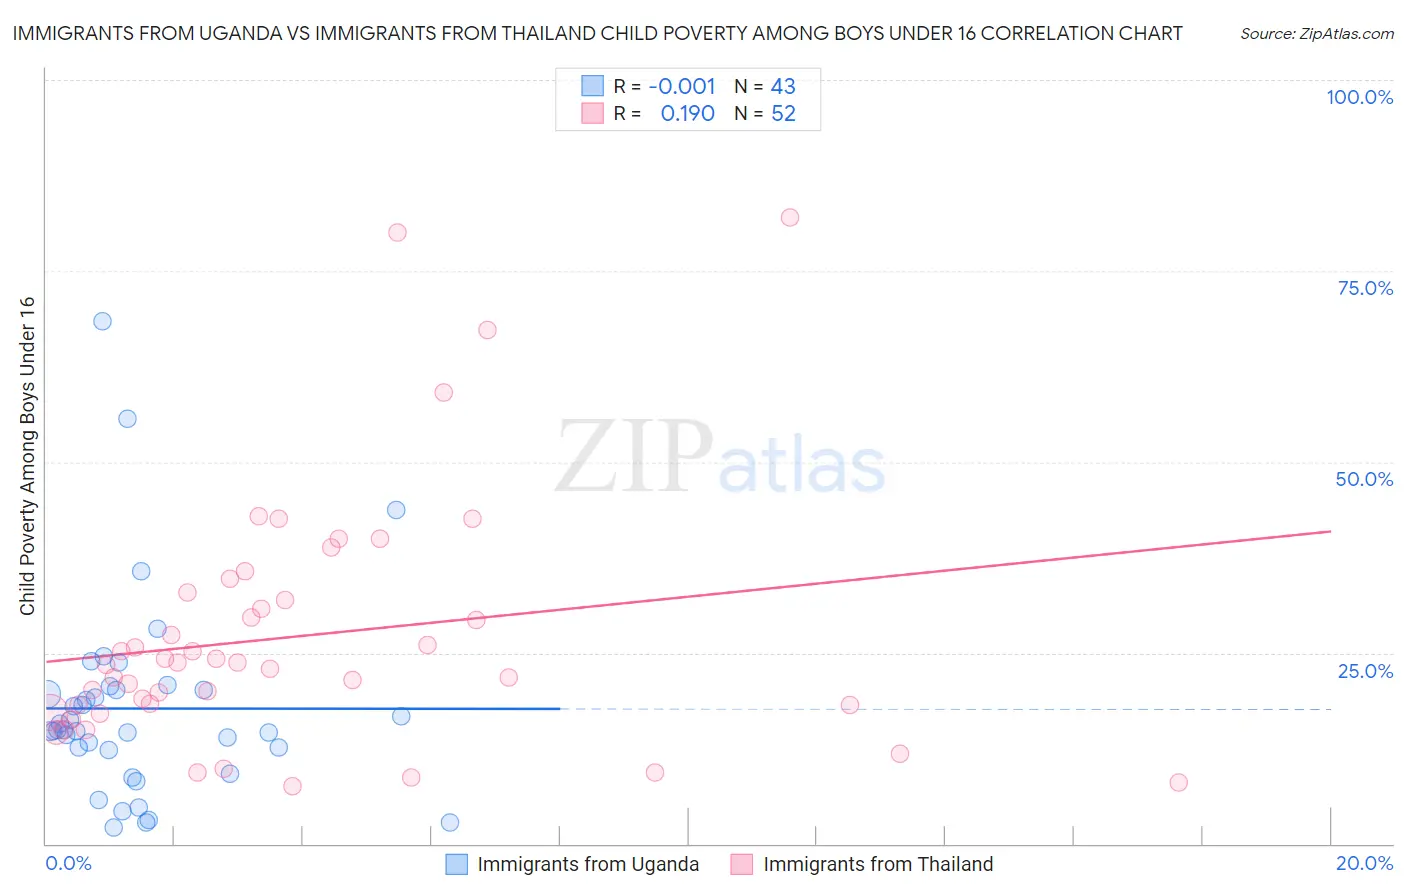 Immigrants from Uganda vs Immigrants from Thailand Child Poverty Among Boys Under 16